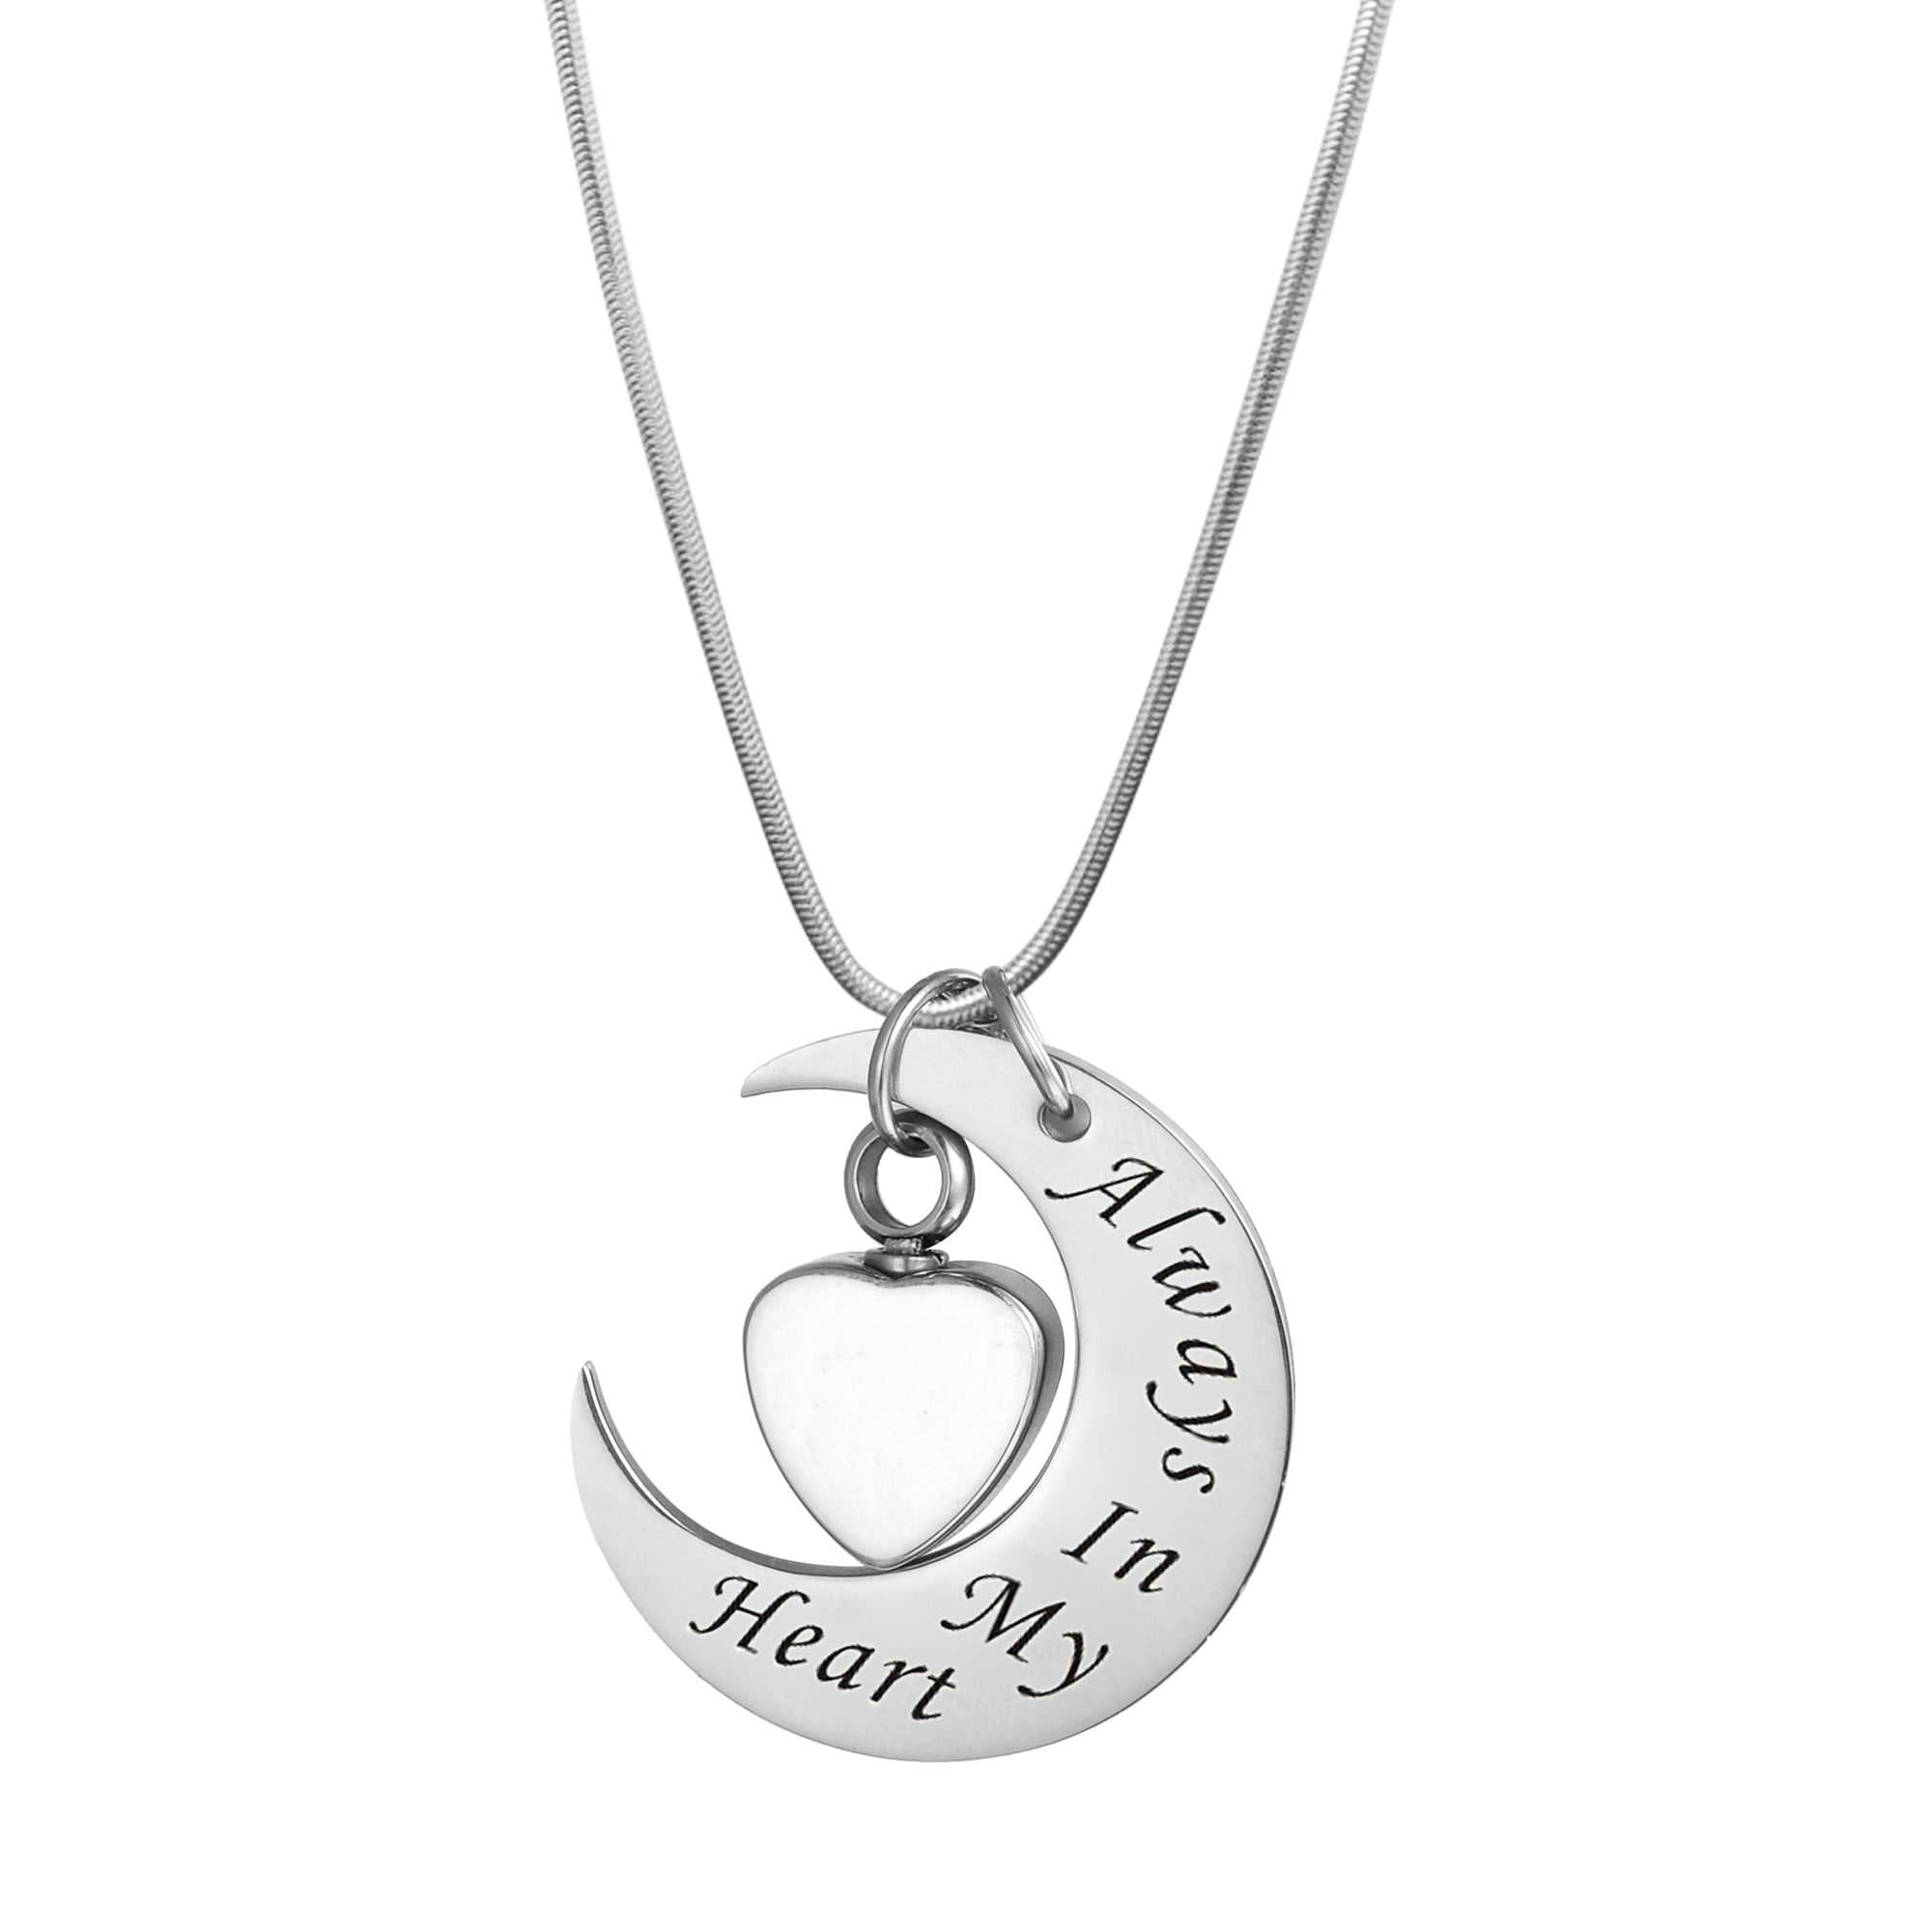 Always In My Heart Memorial Cremation Jewelry Urn Ashes Holder Necklace  (Crescent Moon)